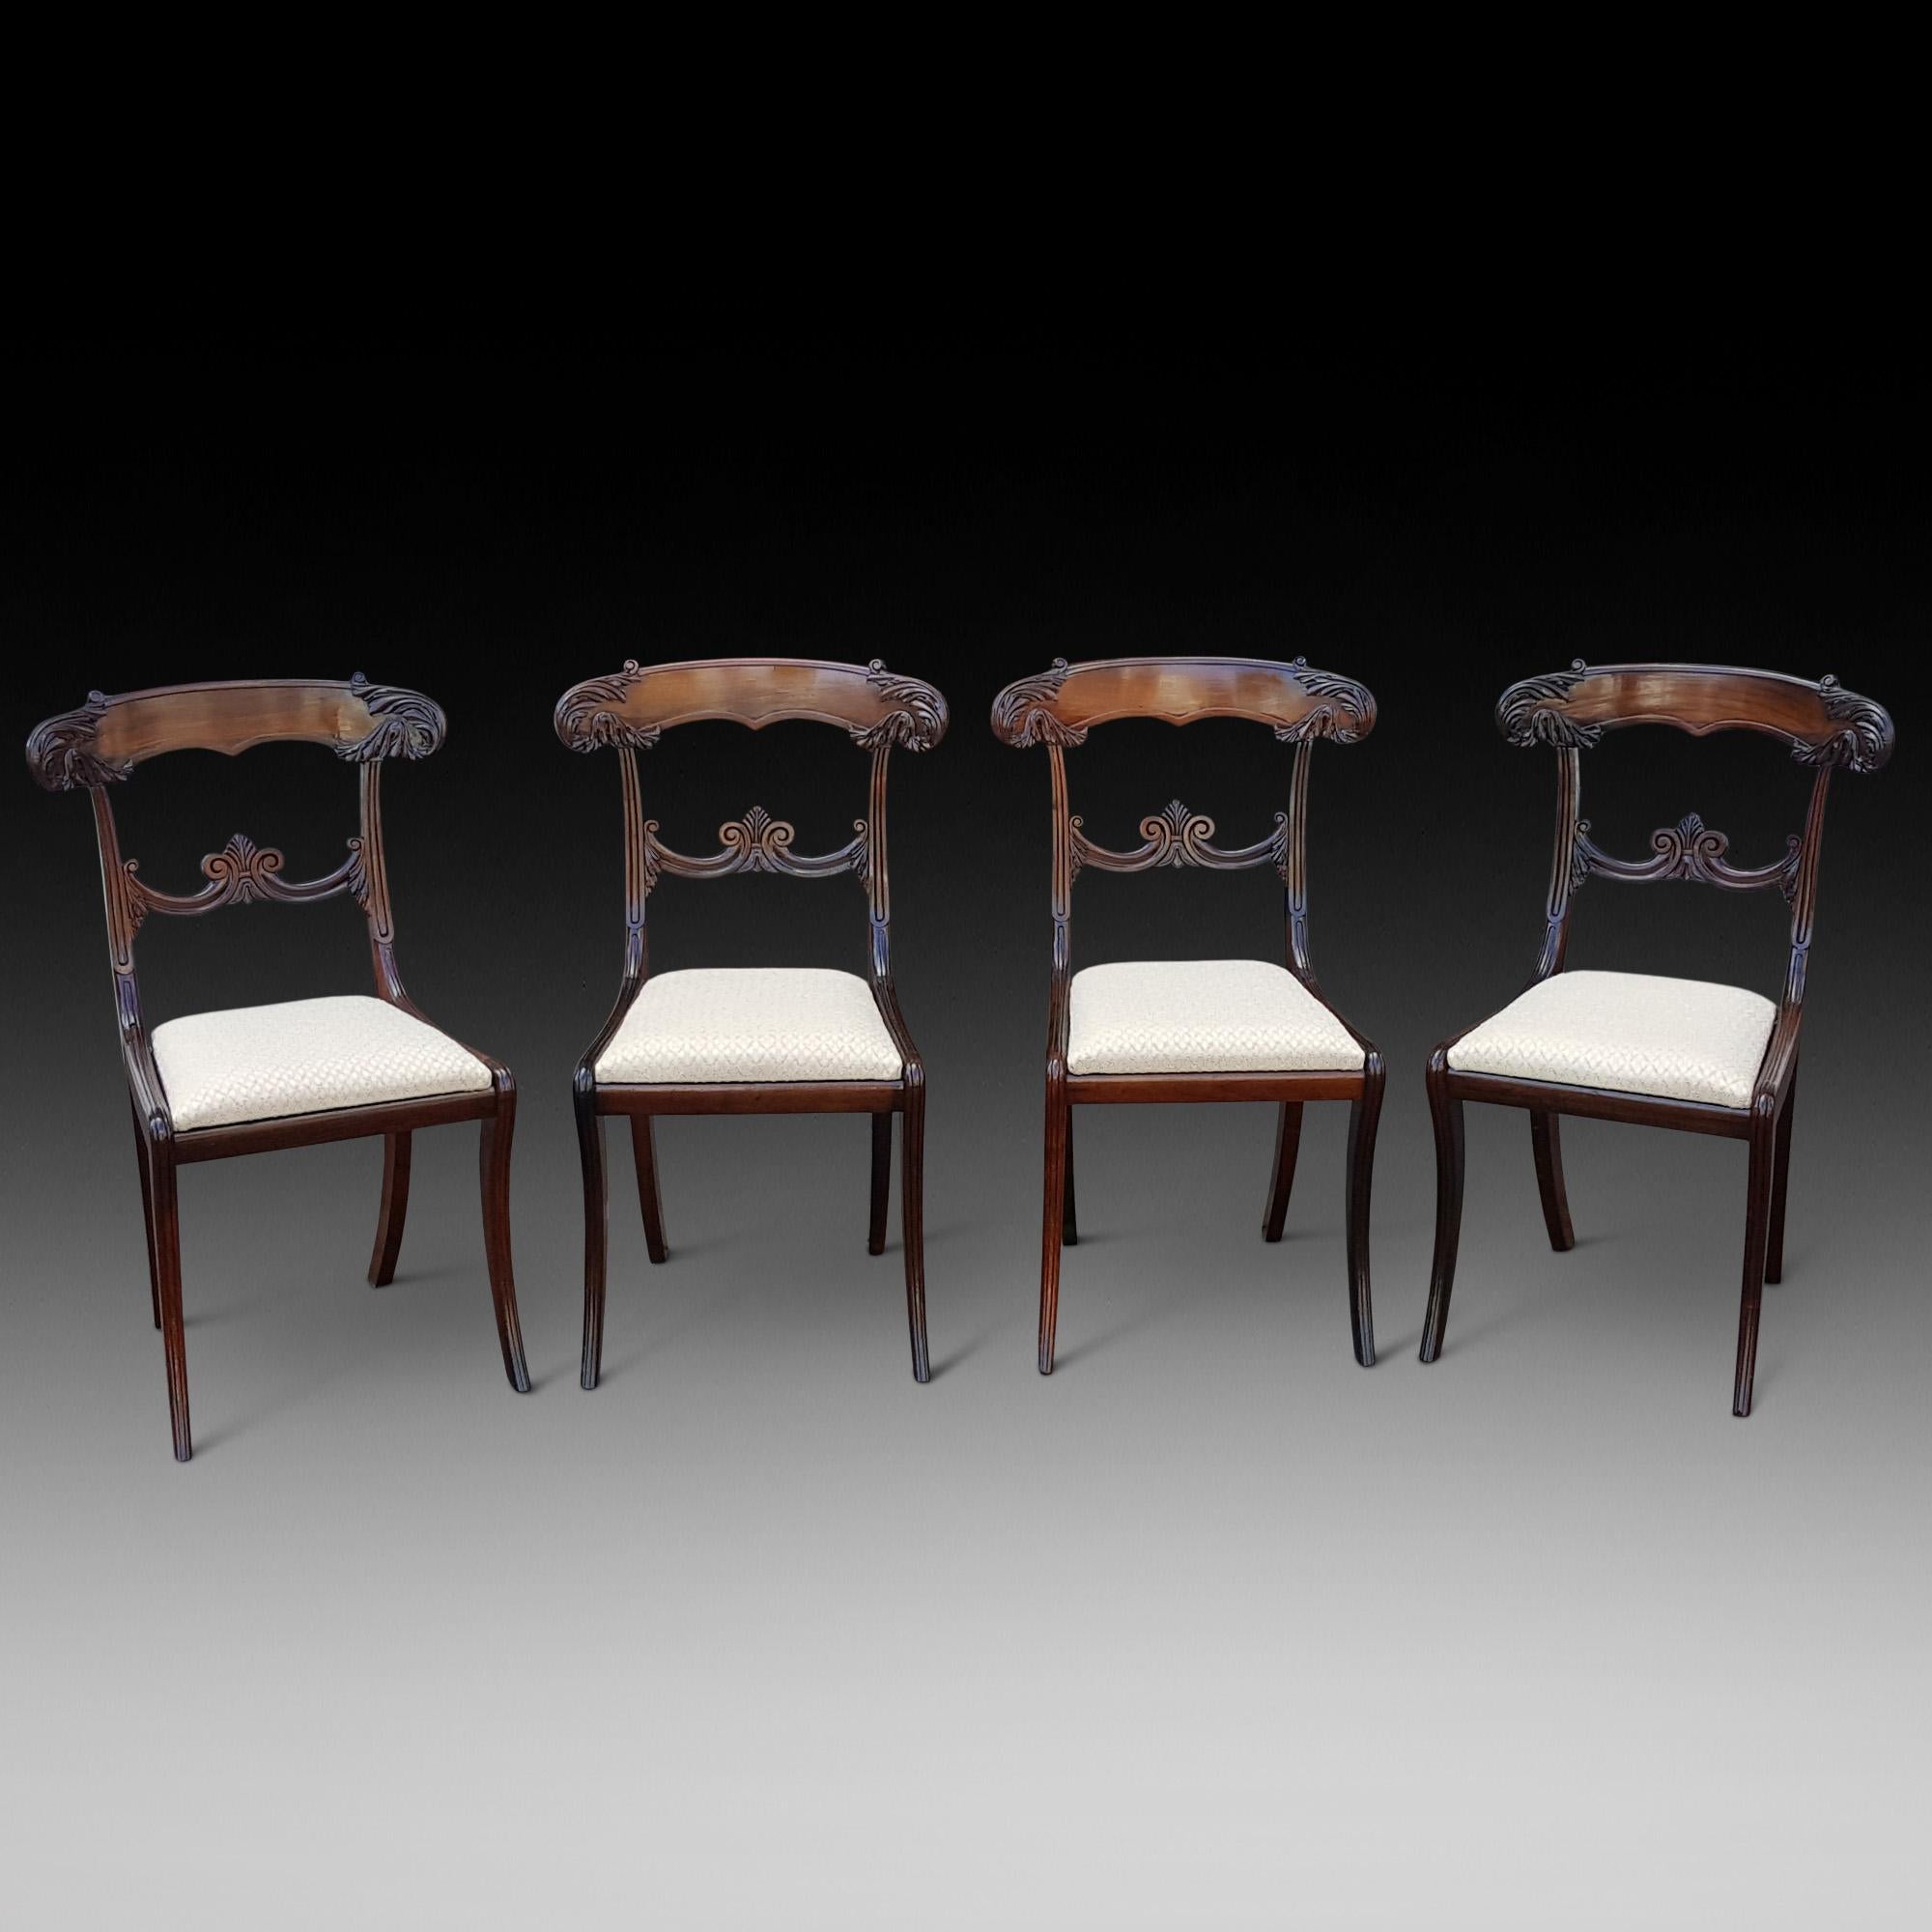 Set of four late Regency rosewood dining chairs with acanthus leaf carved to rail, scroll and anthemion bar and sabre legs front and back
Measures: 18